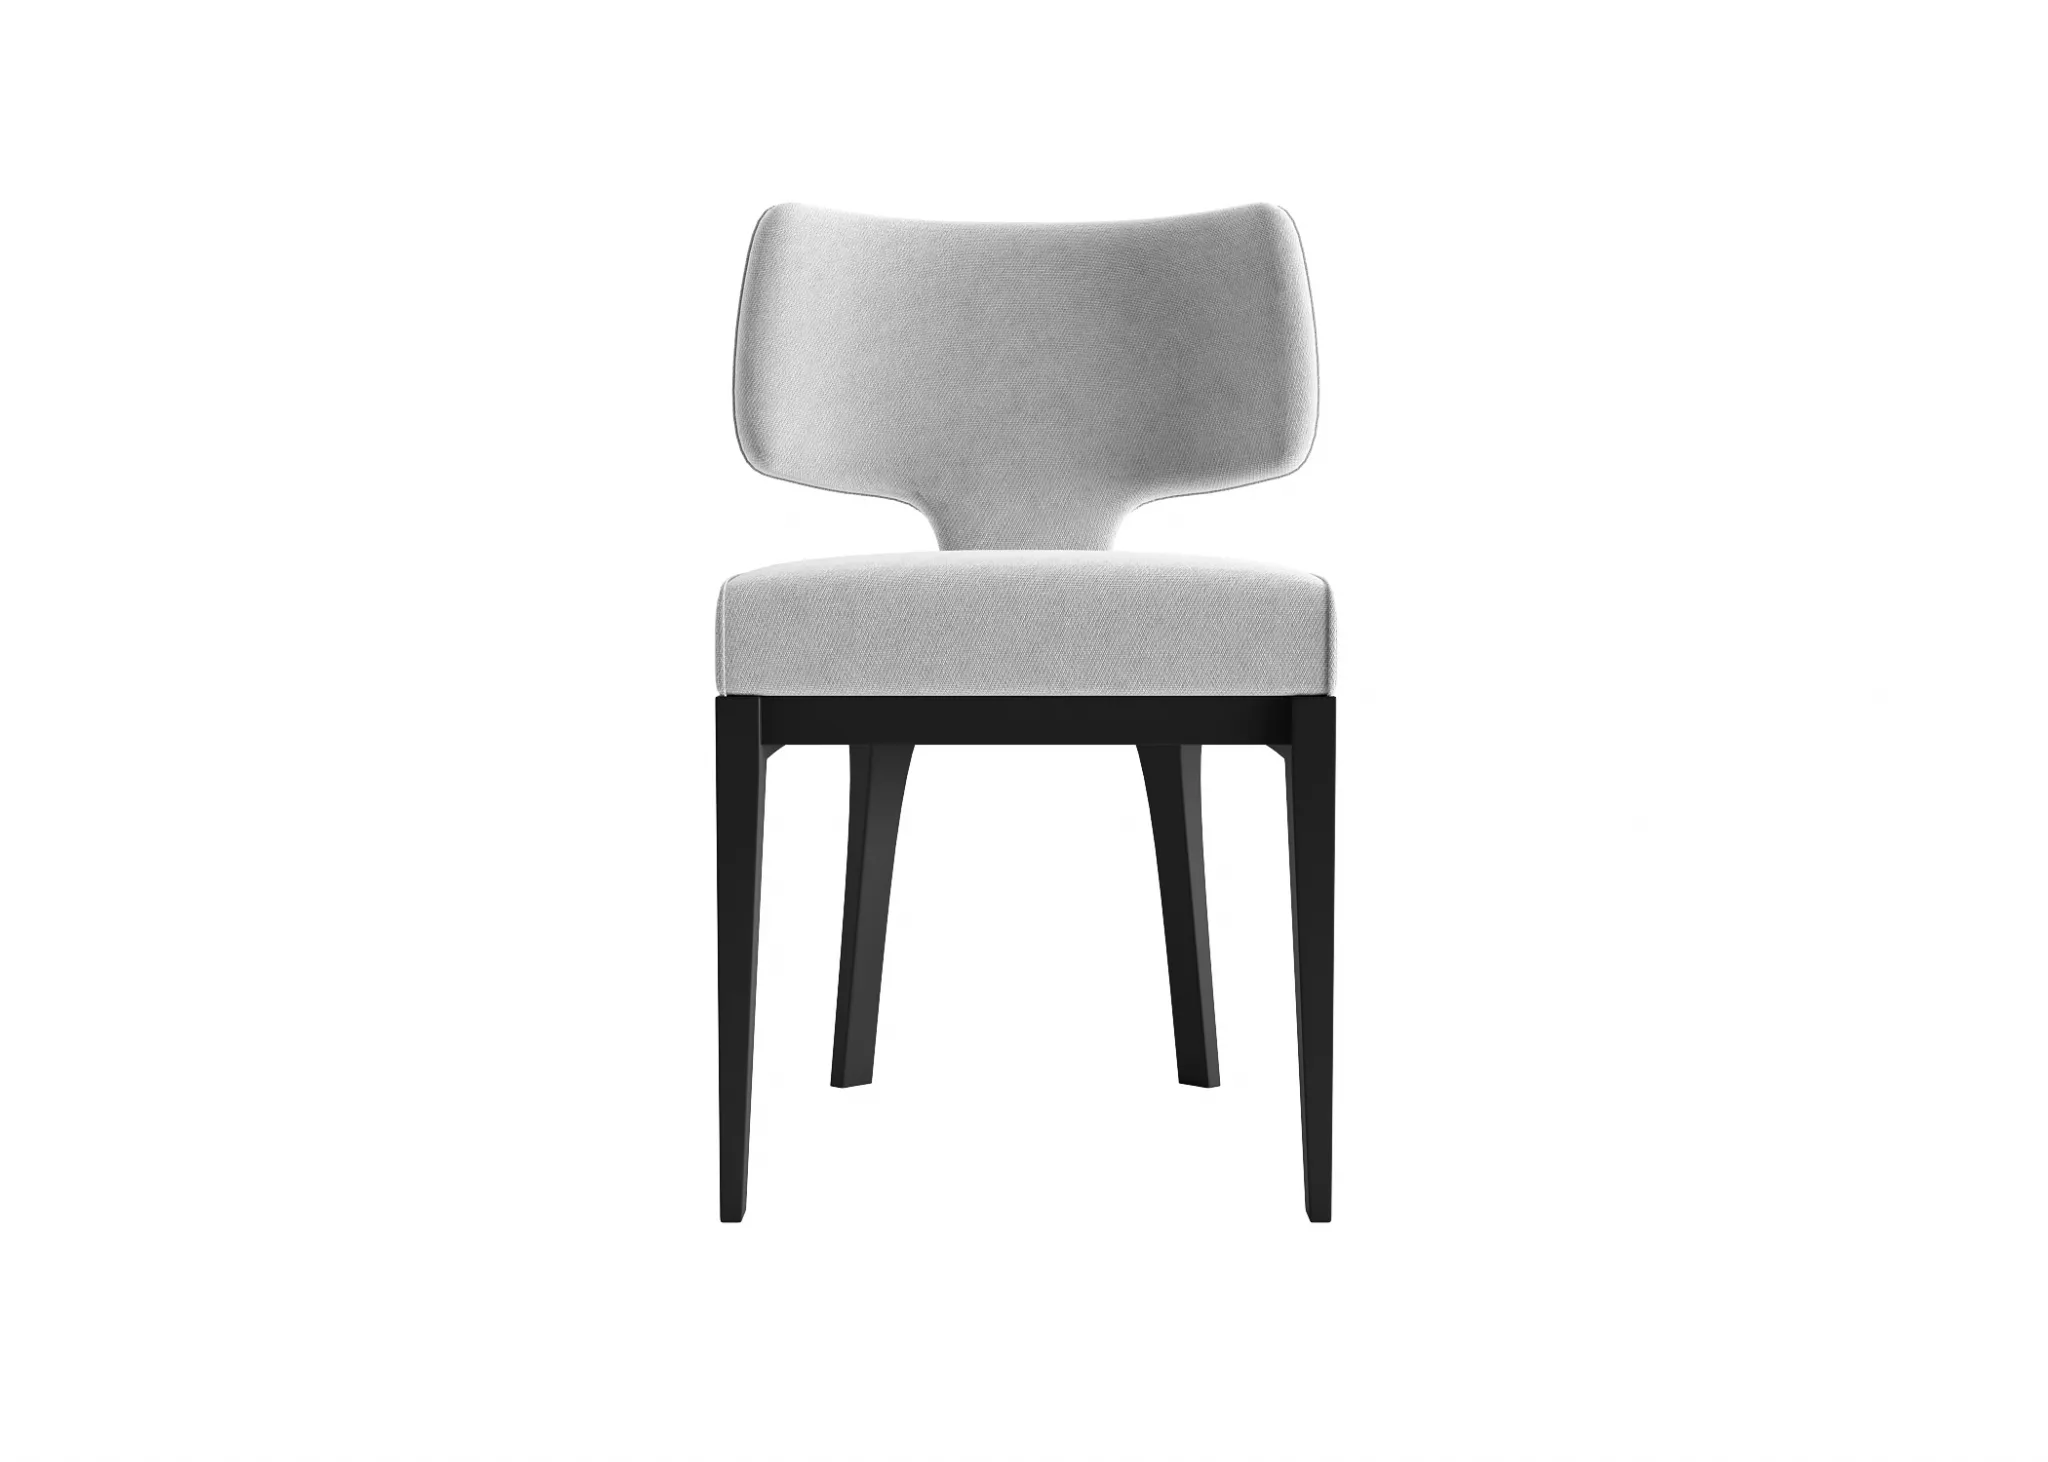 FURNITURE 3D MODELS – CHAIRS – 0515